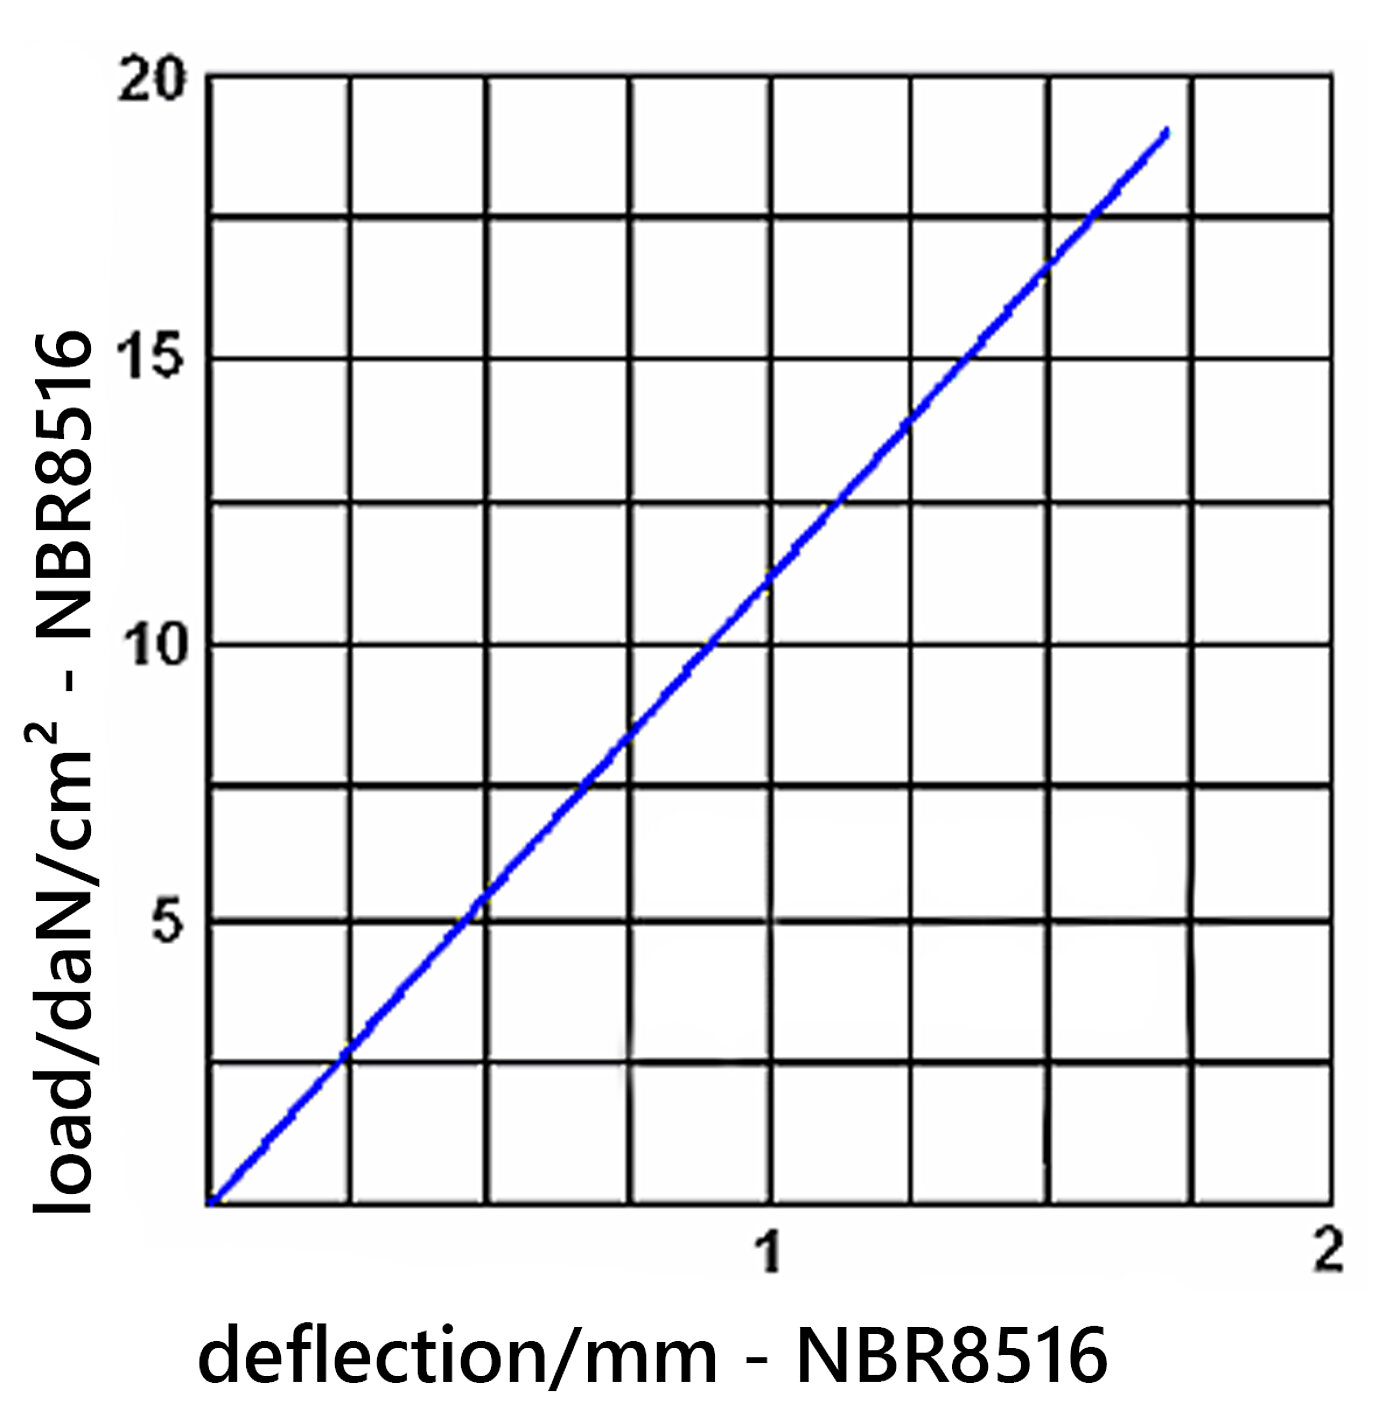 diagramme of the deflection of the elastomer board NBR8516 under load 